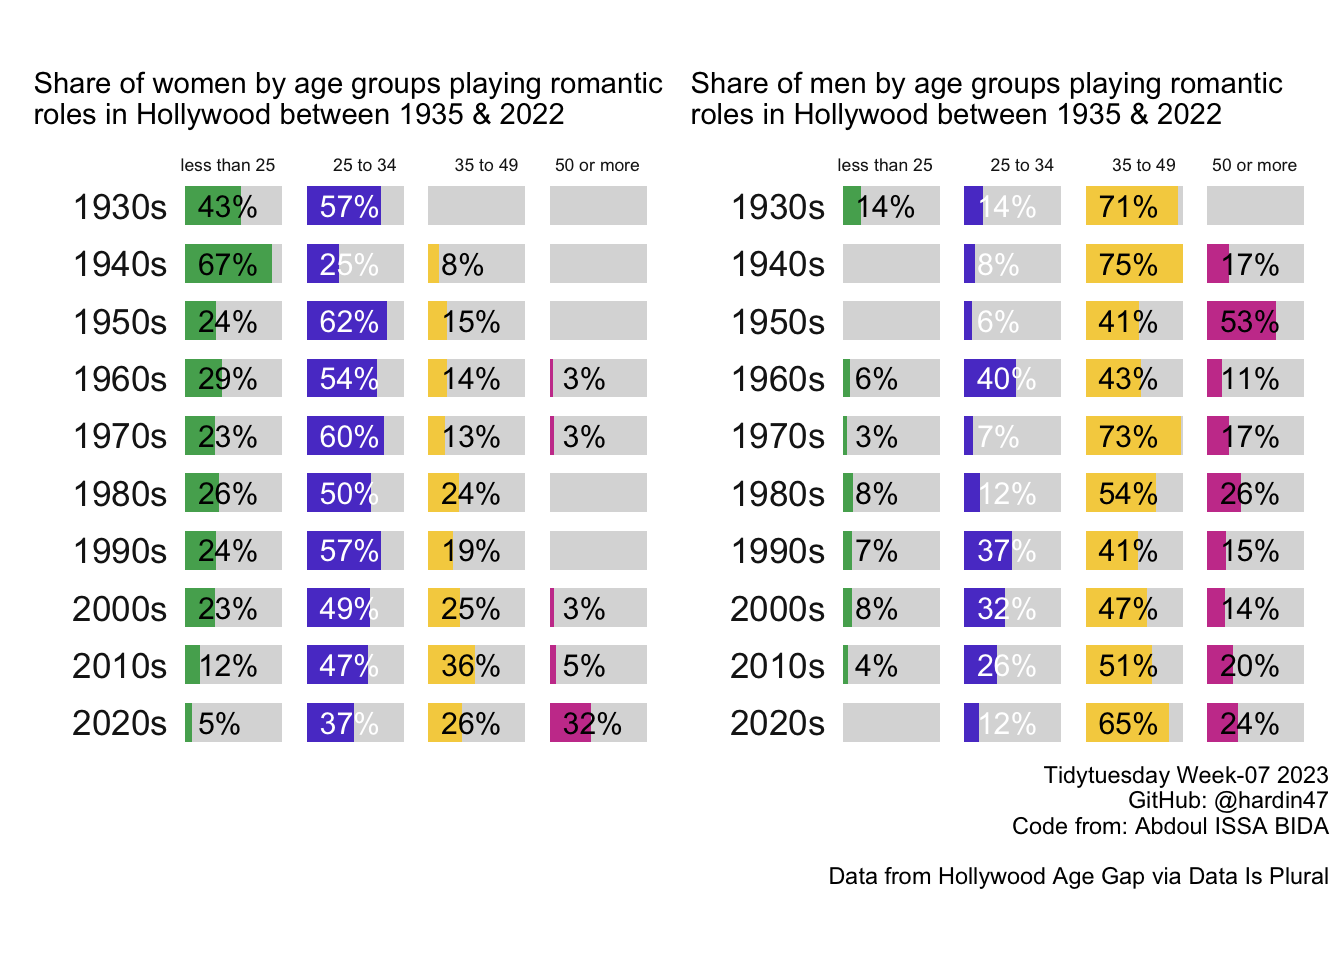 By breaking down the proportion of men and women in each age category, by decade, we see that male love interests have consistently been 35 to 49 years old with most of the rest being 50 years old or older.  Women, on the other hand, have been primarily 25 to 34 years old, only recently become more heavily represented by acors in their 40s and 50s.